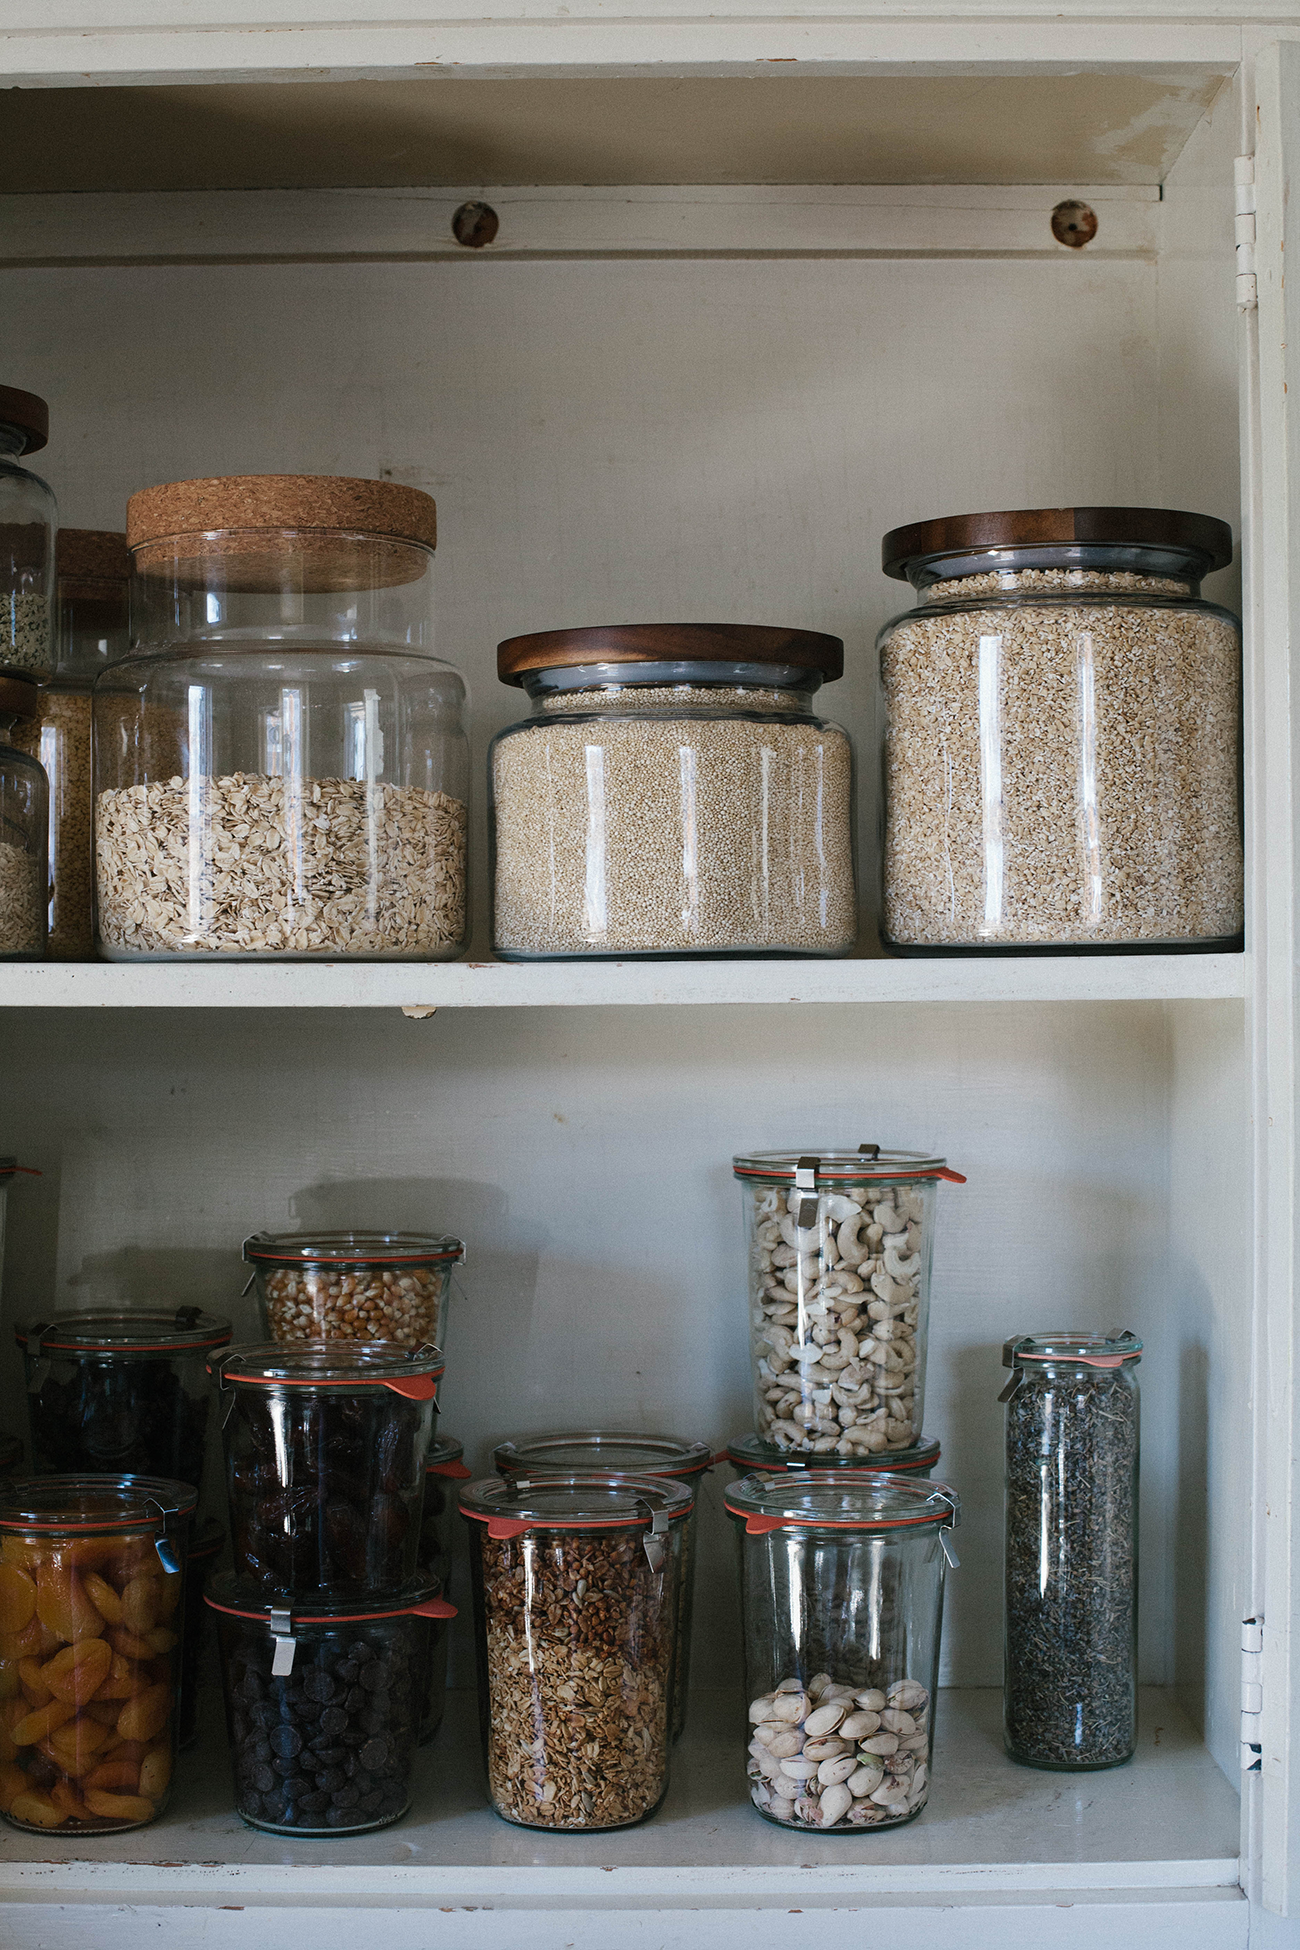 Pantry Essentials and How to Organize Your Pantry - A Daily Something